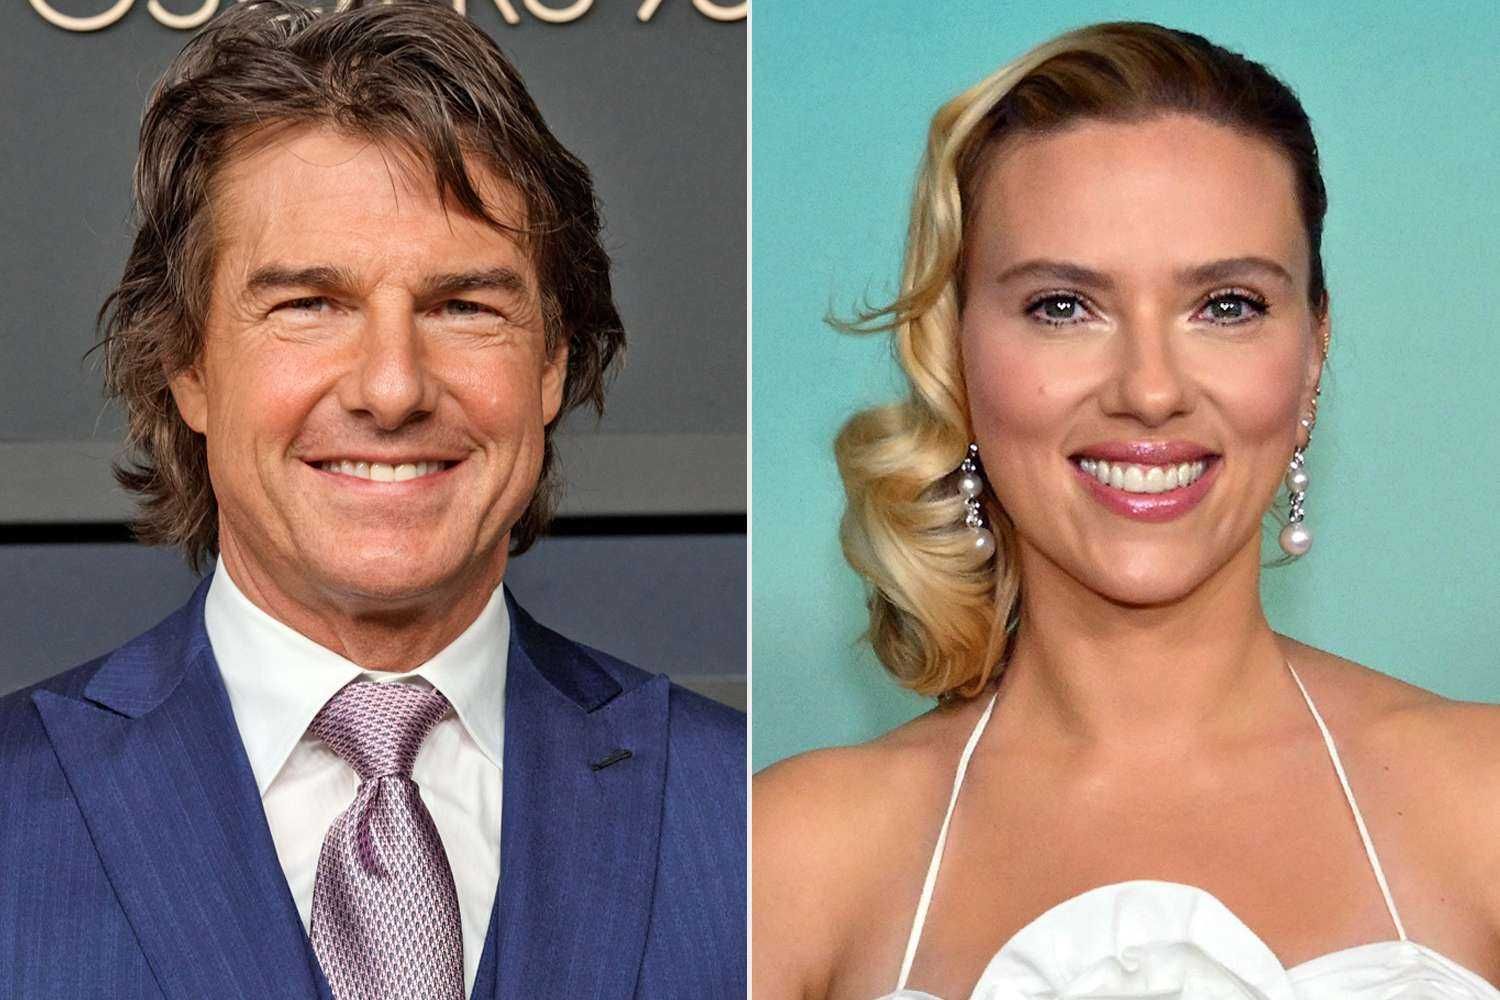 Tom Cruise and Scarlett Johansson (Source: People)